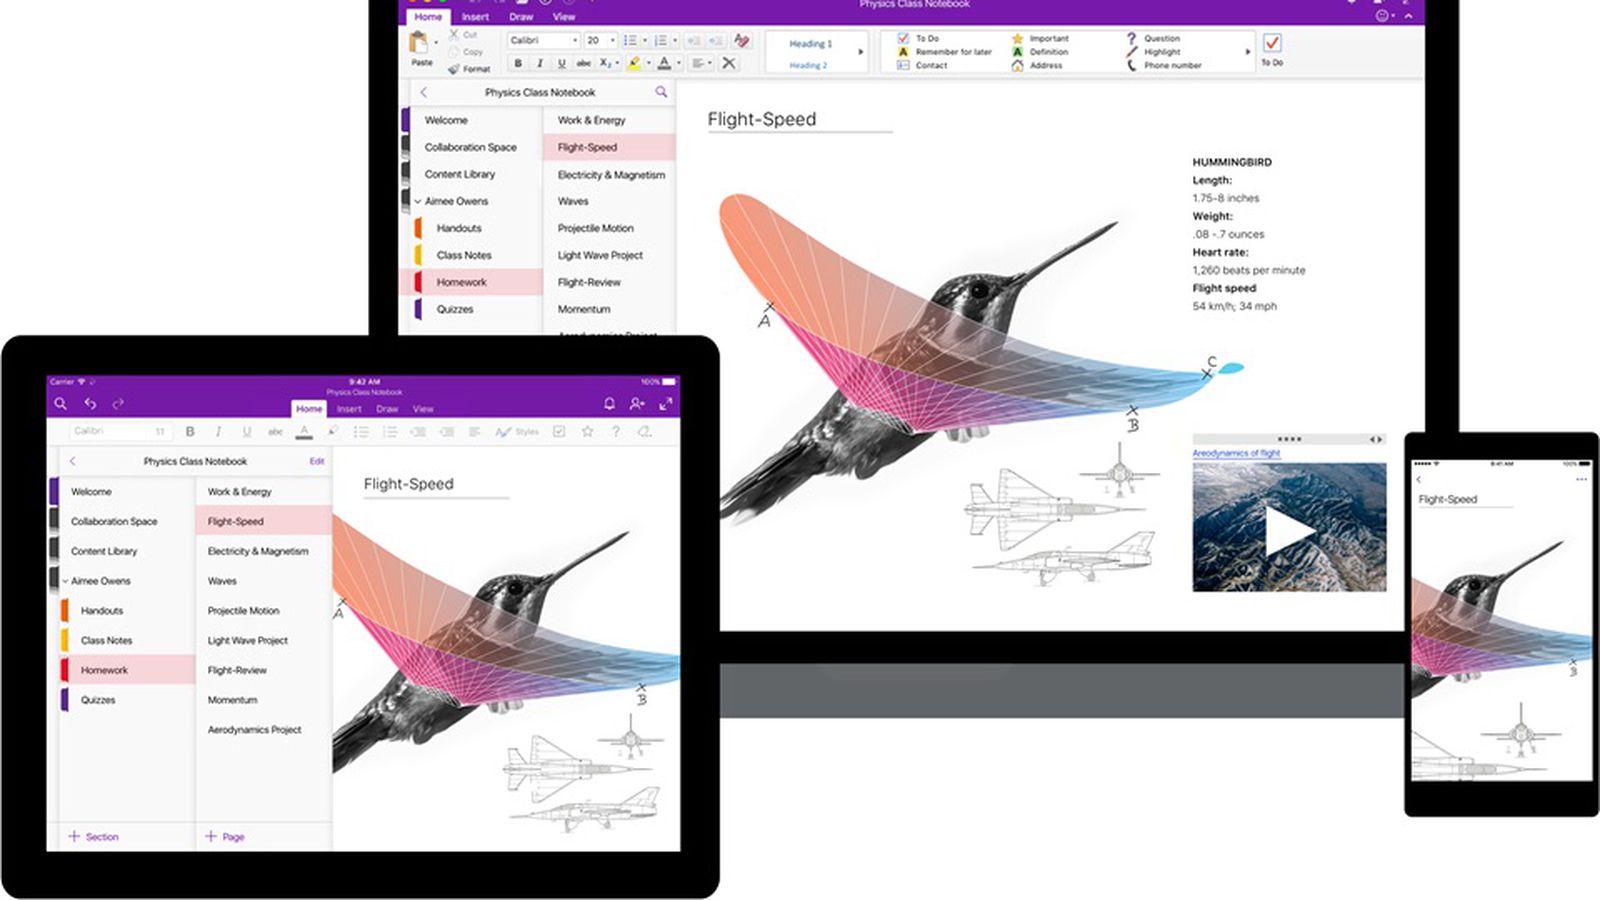 onenote download for mac